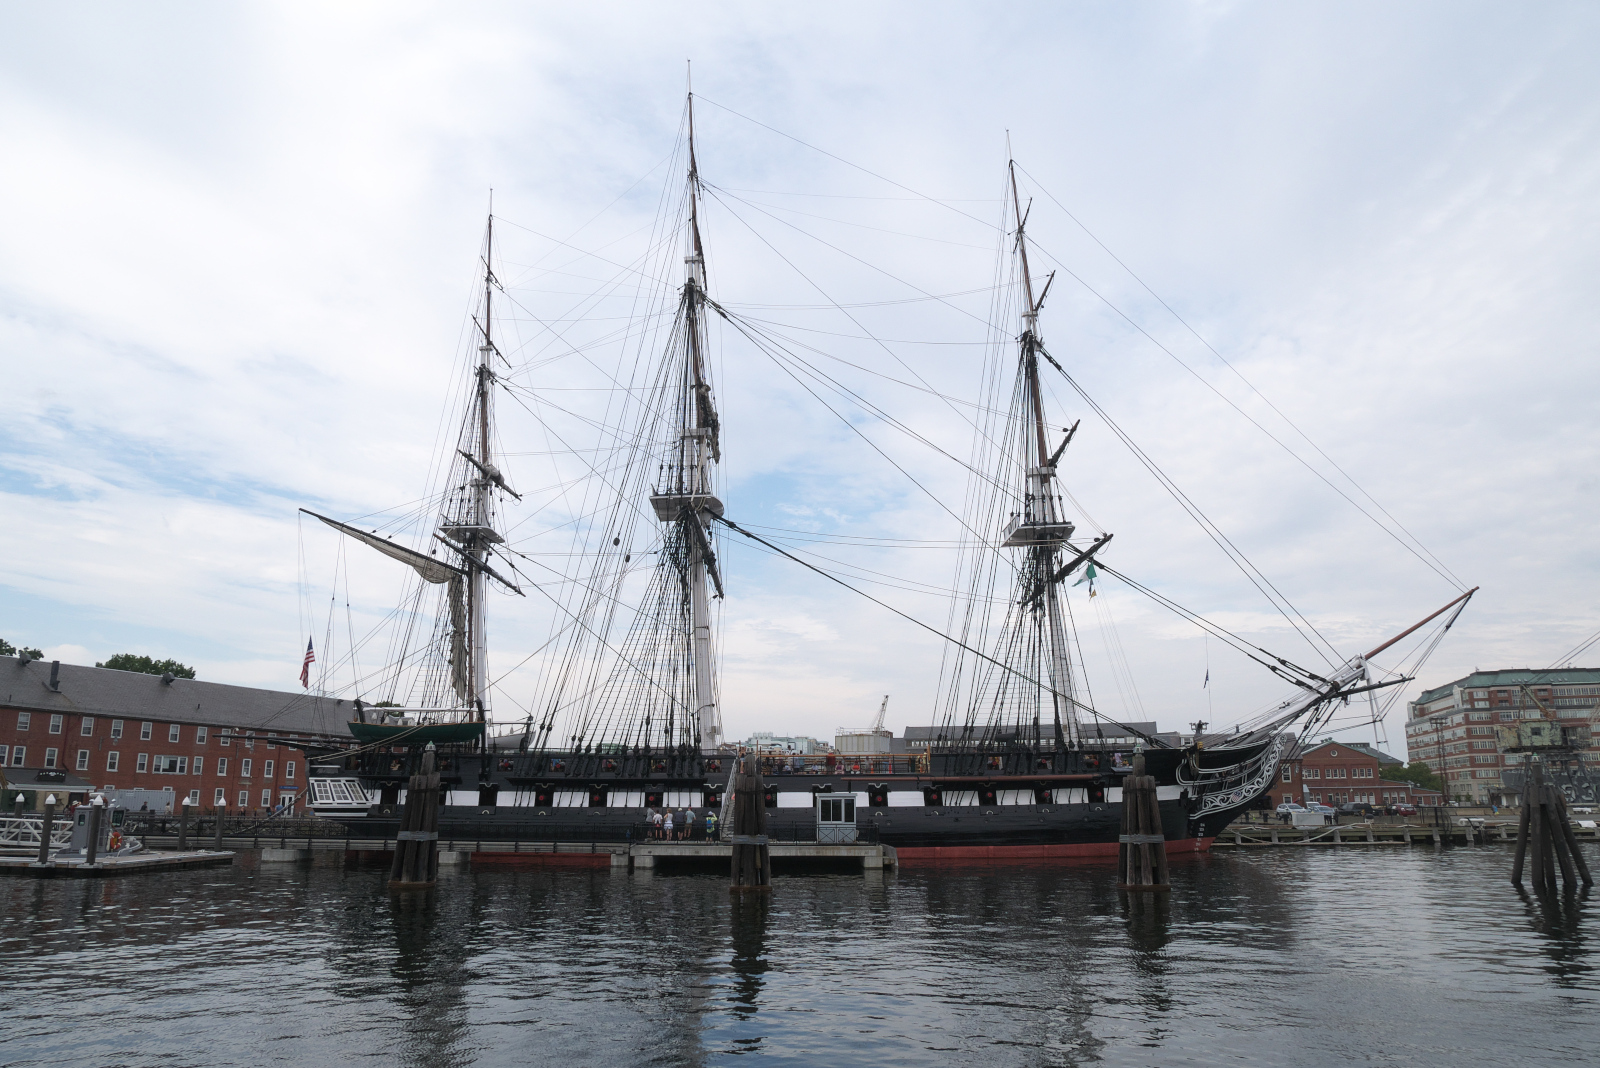 View of the USS Constitution from the starboard side.